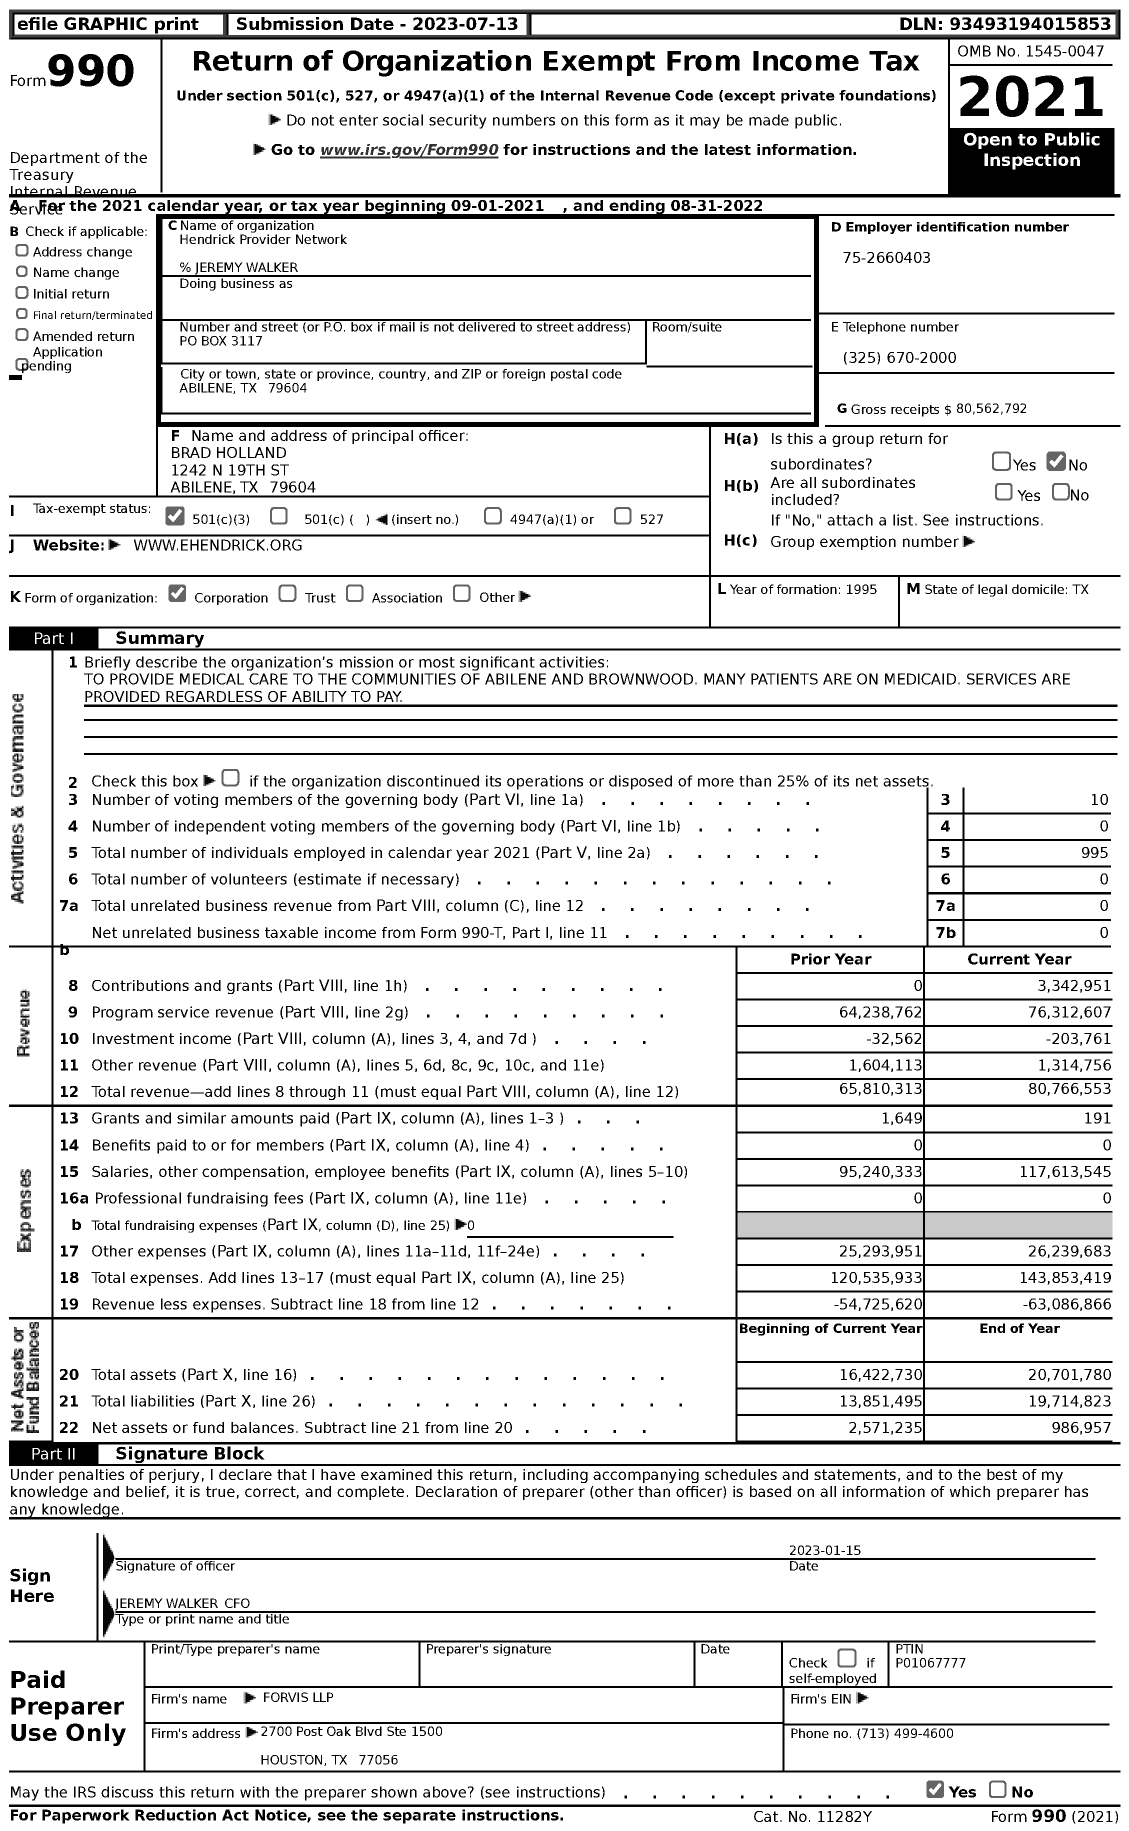 Image of first page of 2021 Form 990 for Hendrick Provider Network